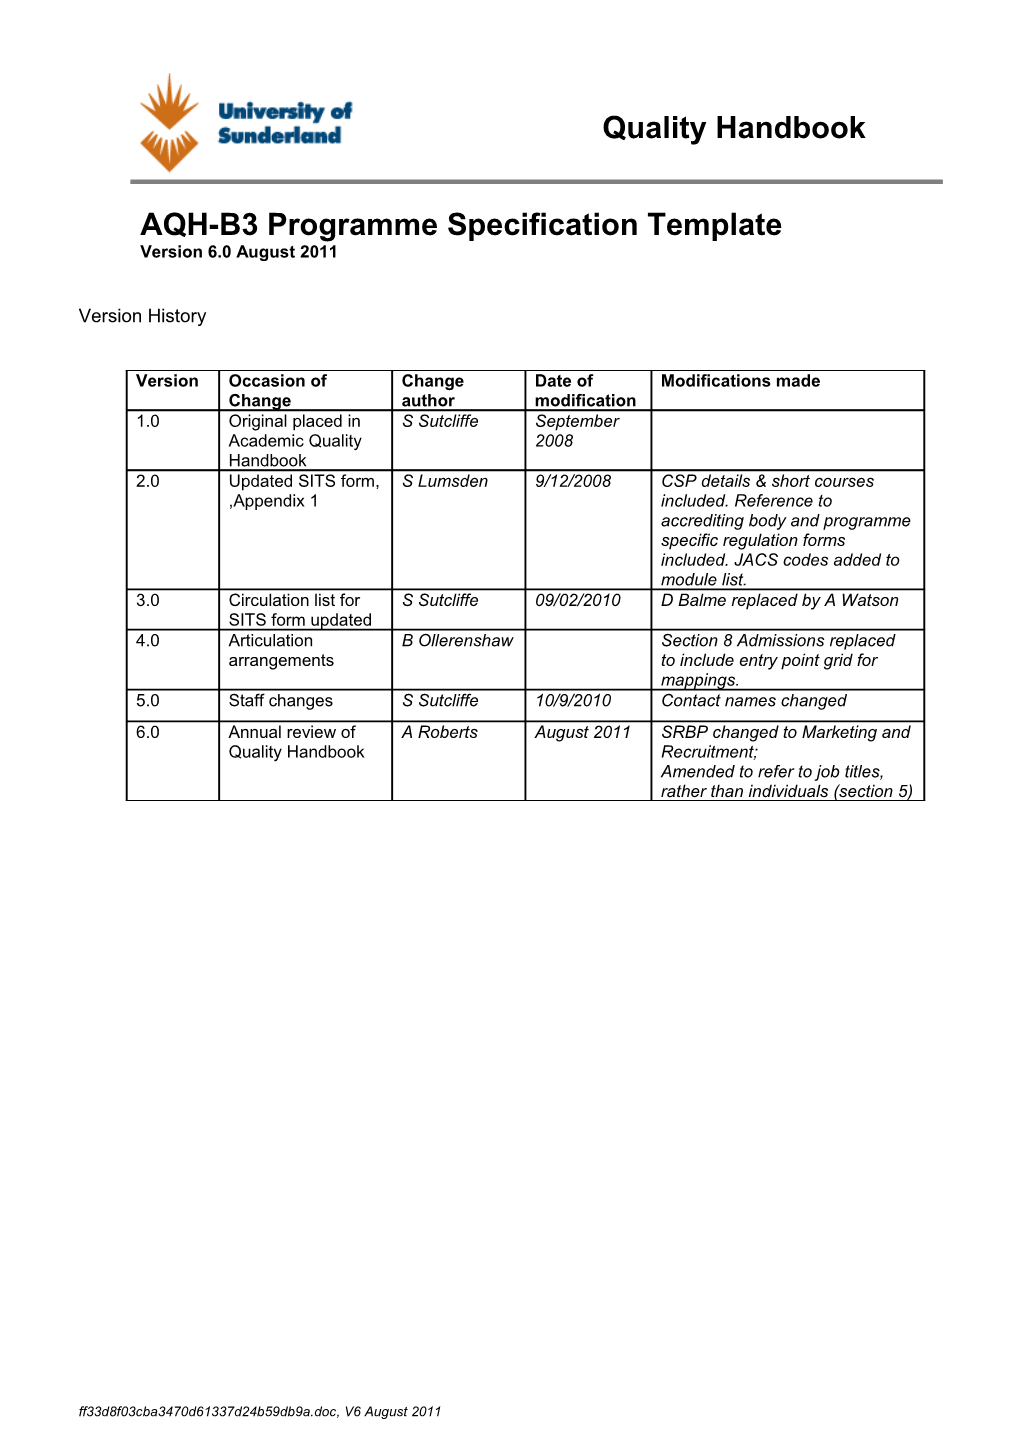 Programme Specification Template s3